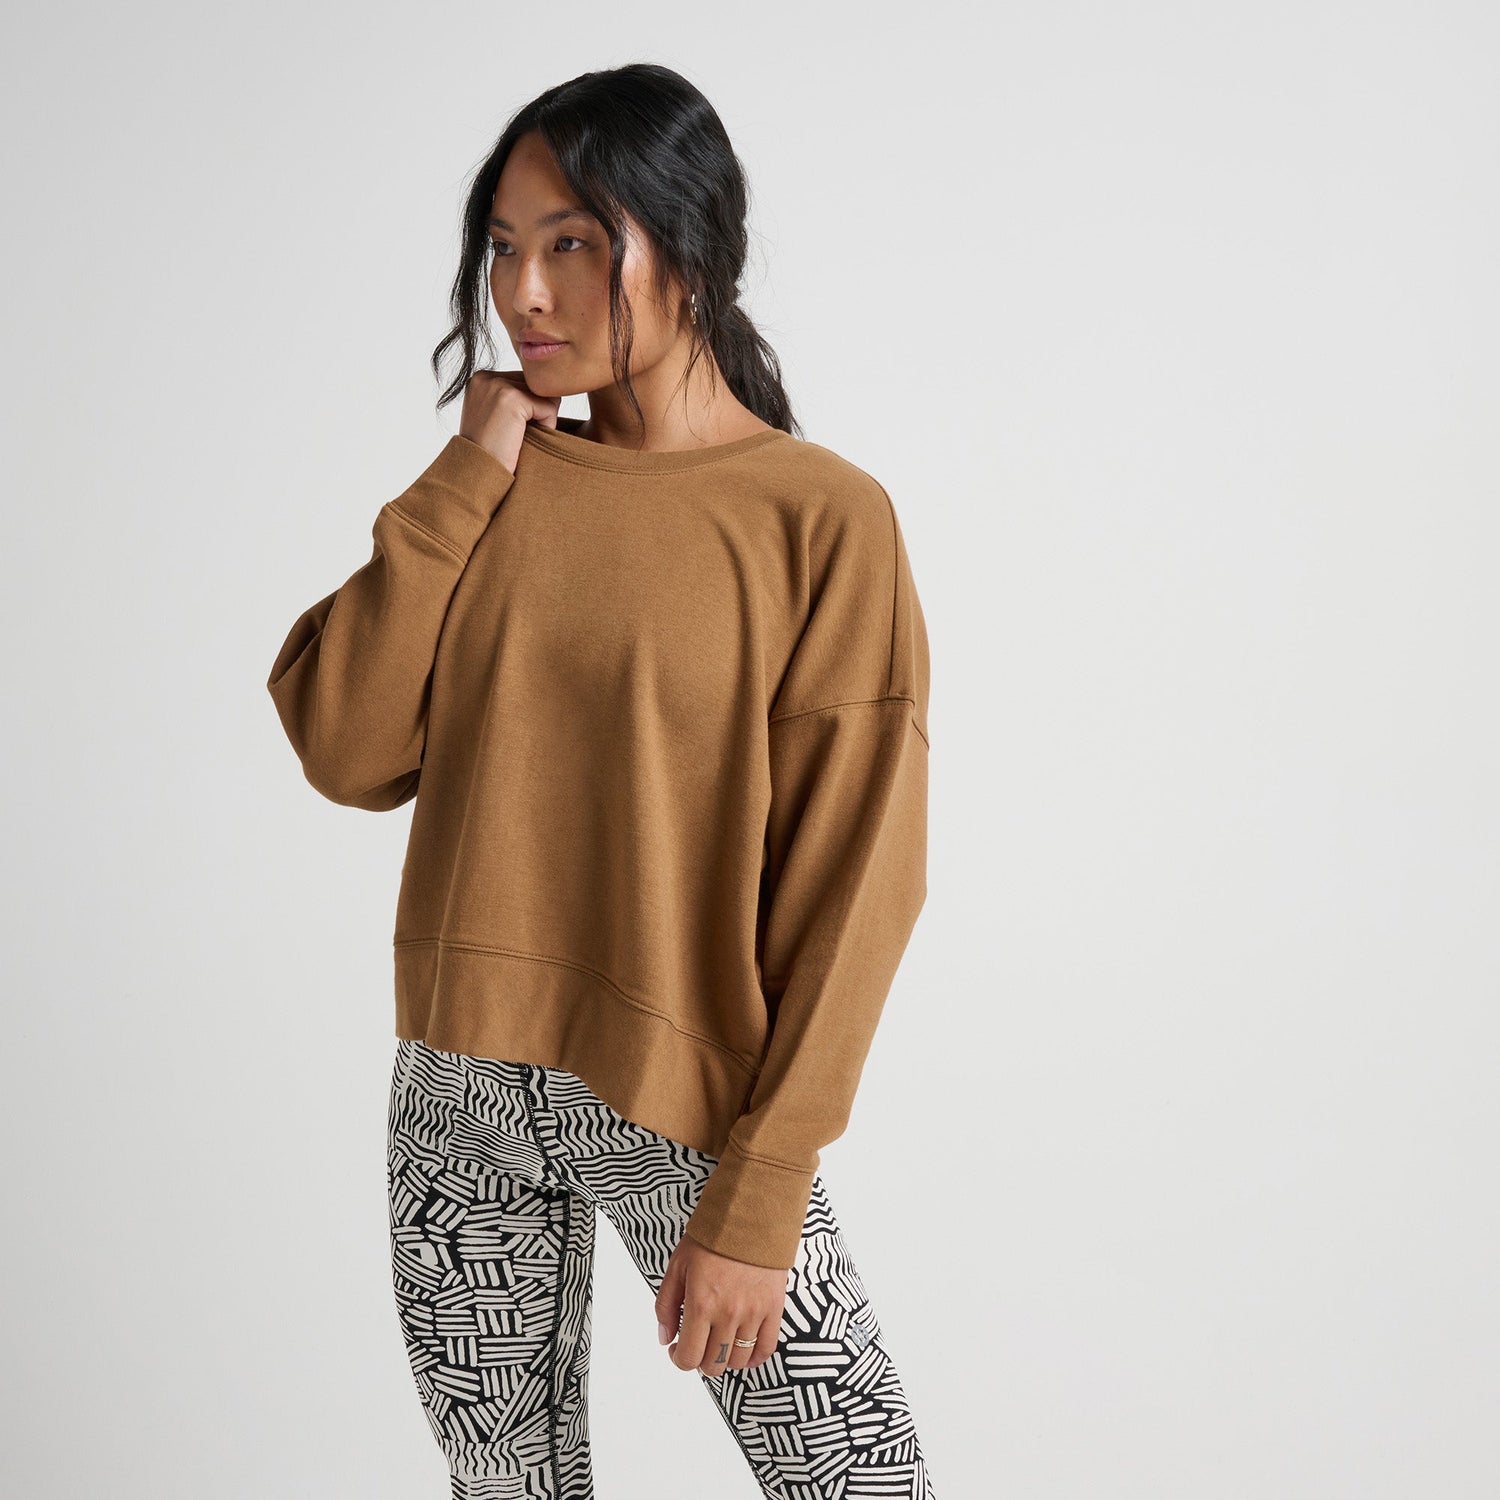 Stance Women's Shelter Crew Tobacco